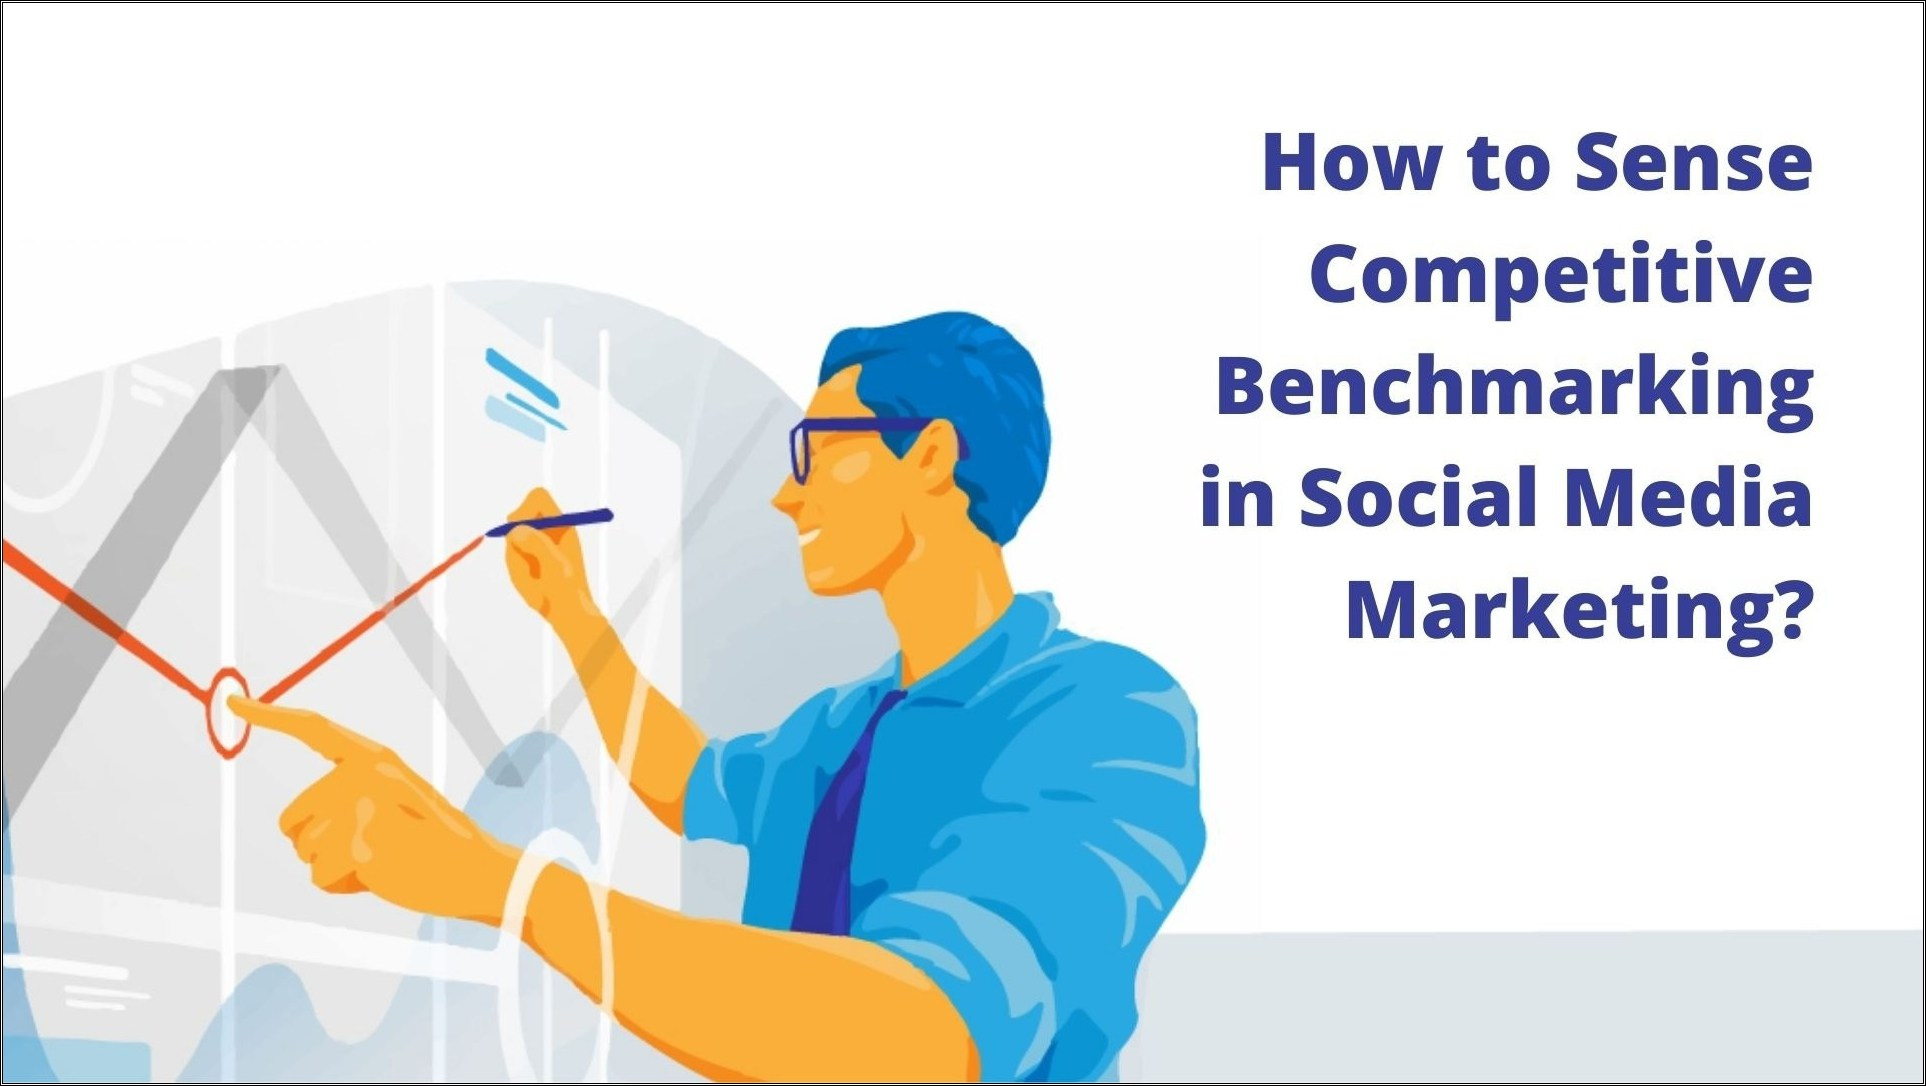 How to sense competitive benchmarking in social media marketing?